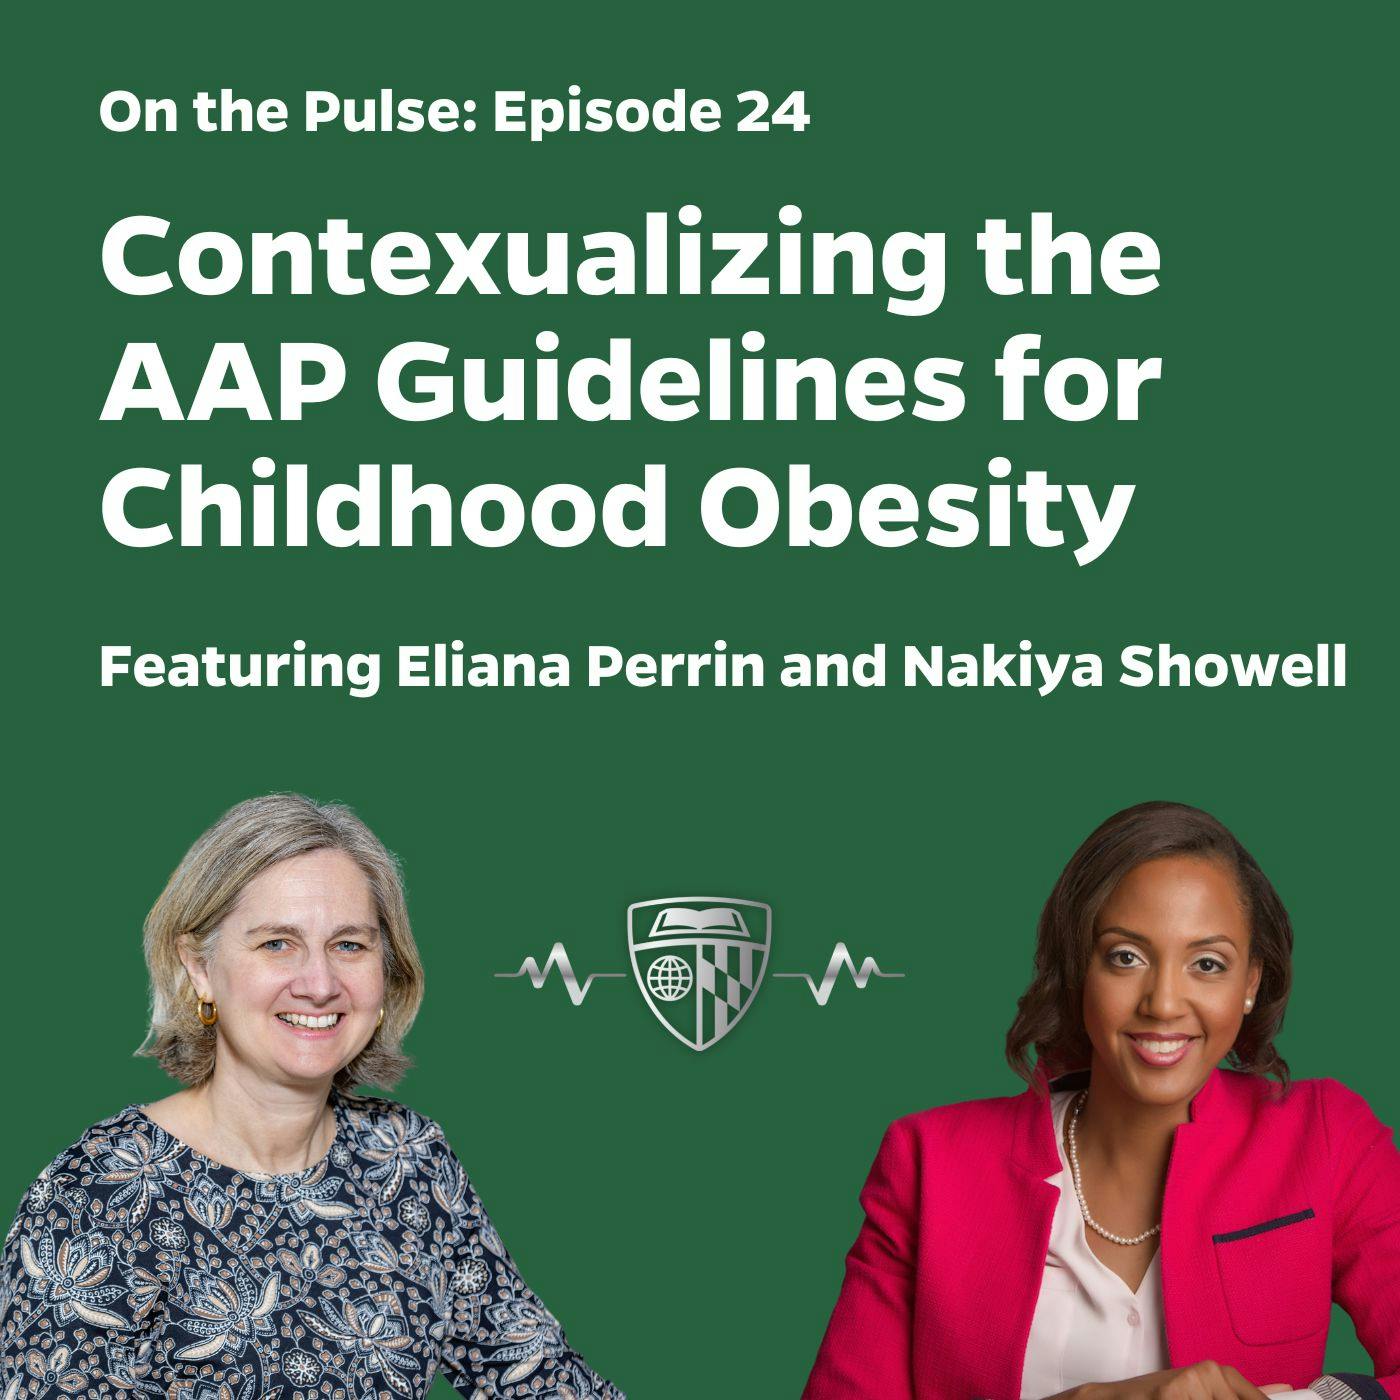 Contextualizing the New AAP Guidelines for Childhood Obesity